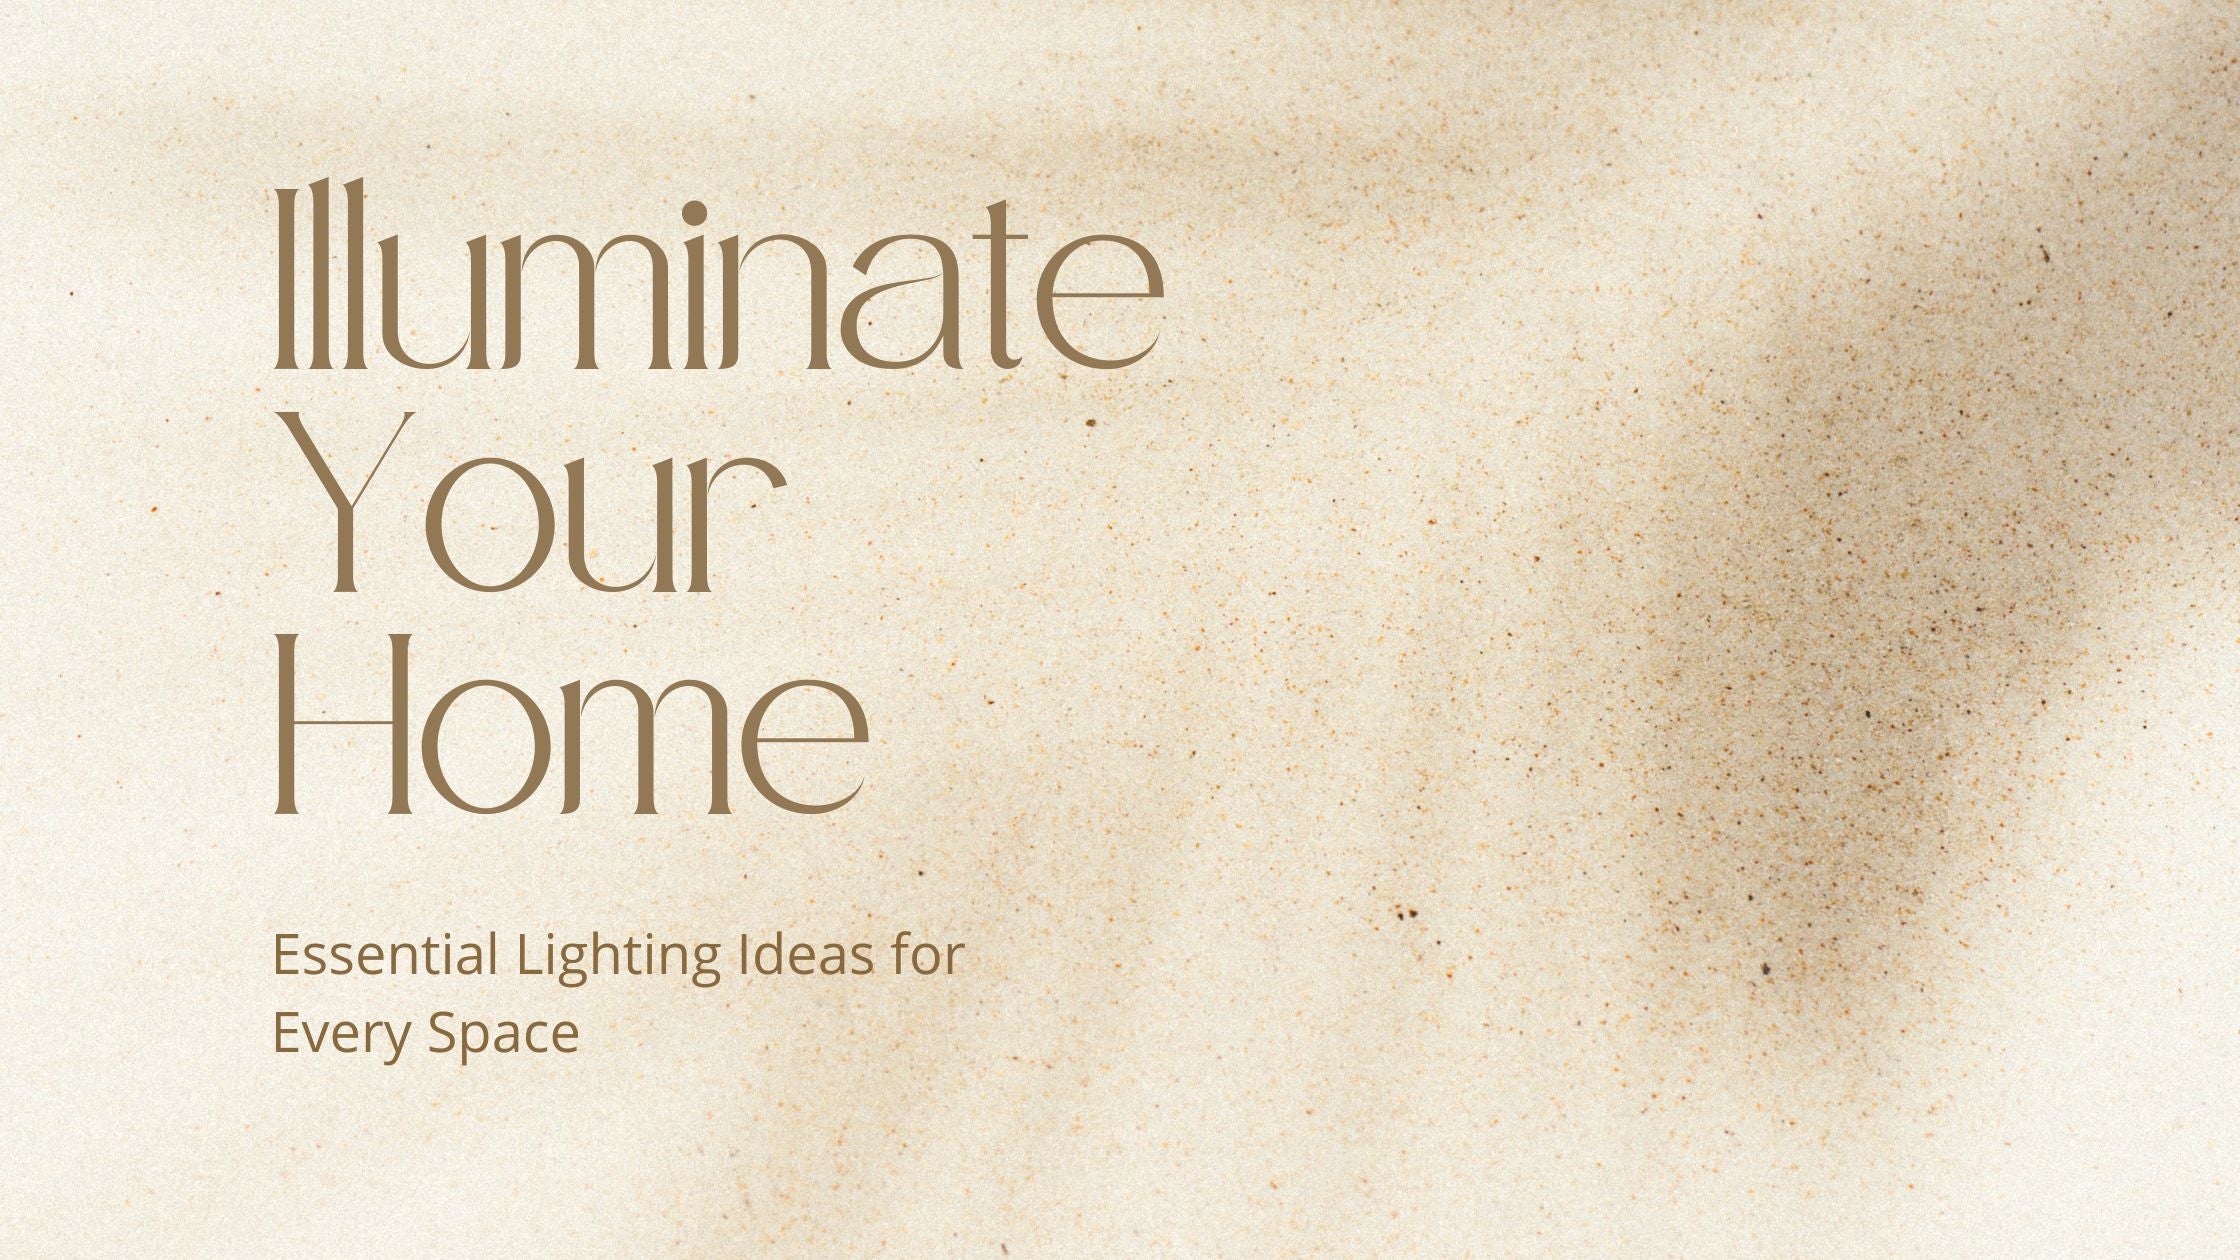 Illuminate Your Home: Essential Lighting Ideas for Every Space